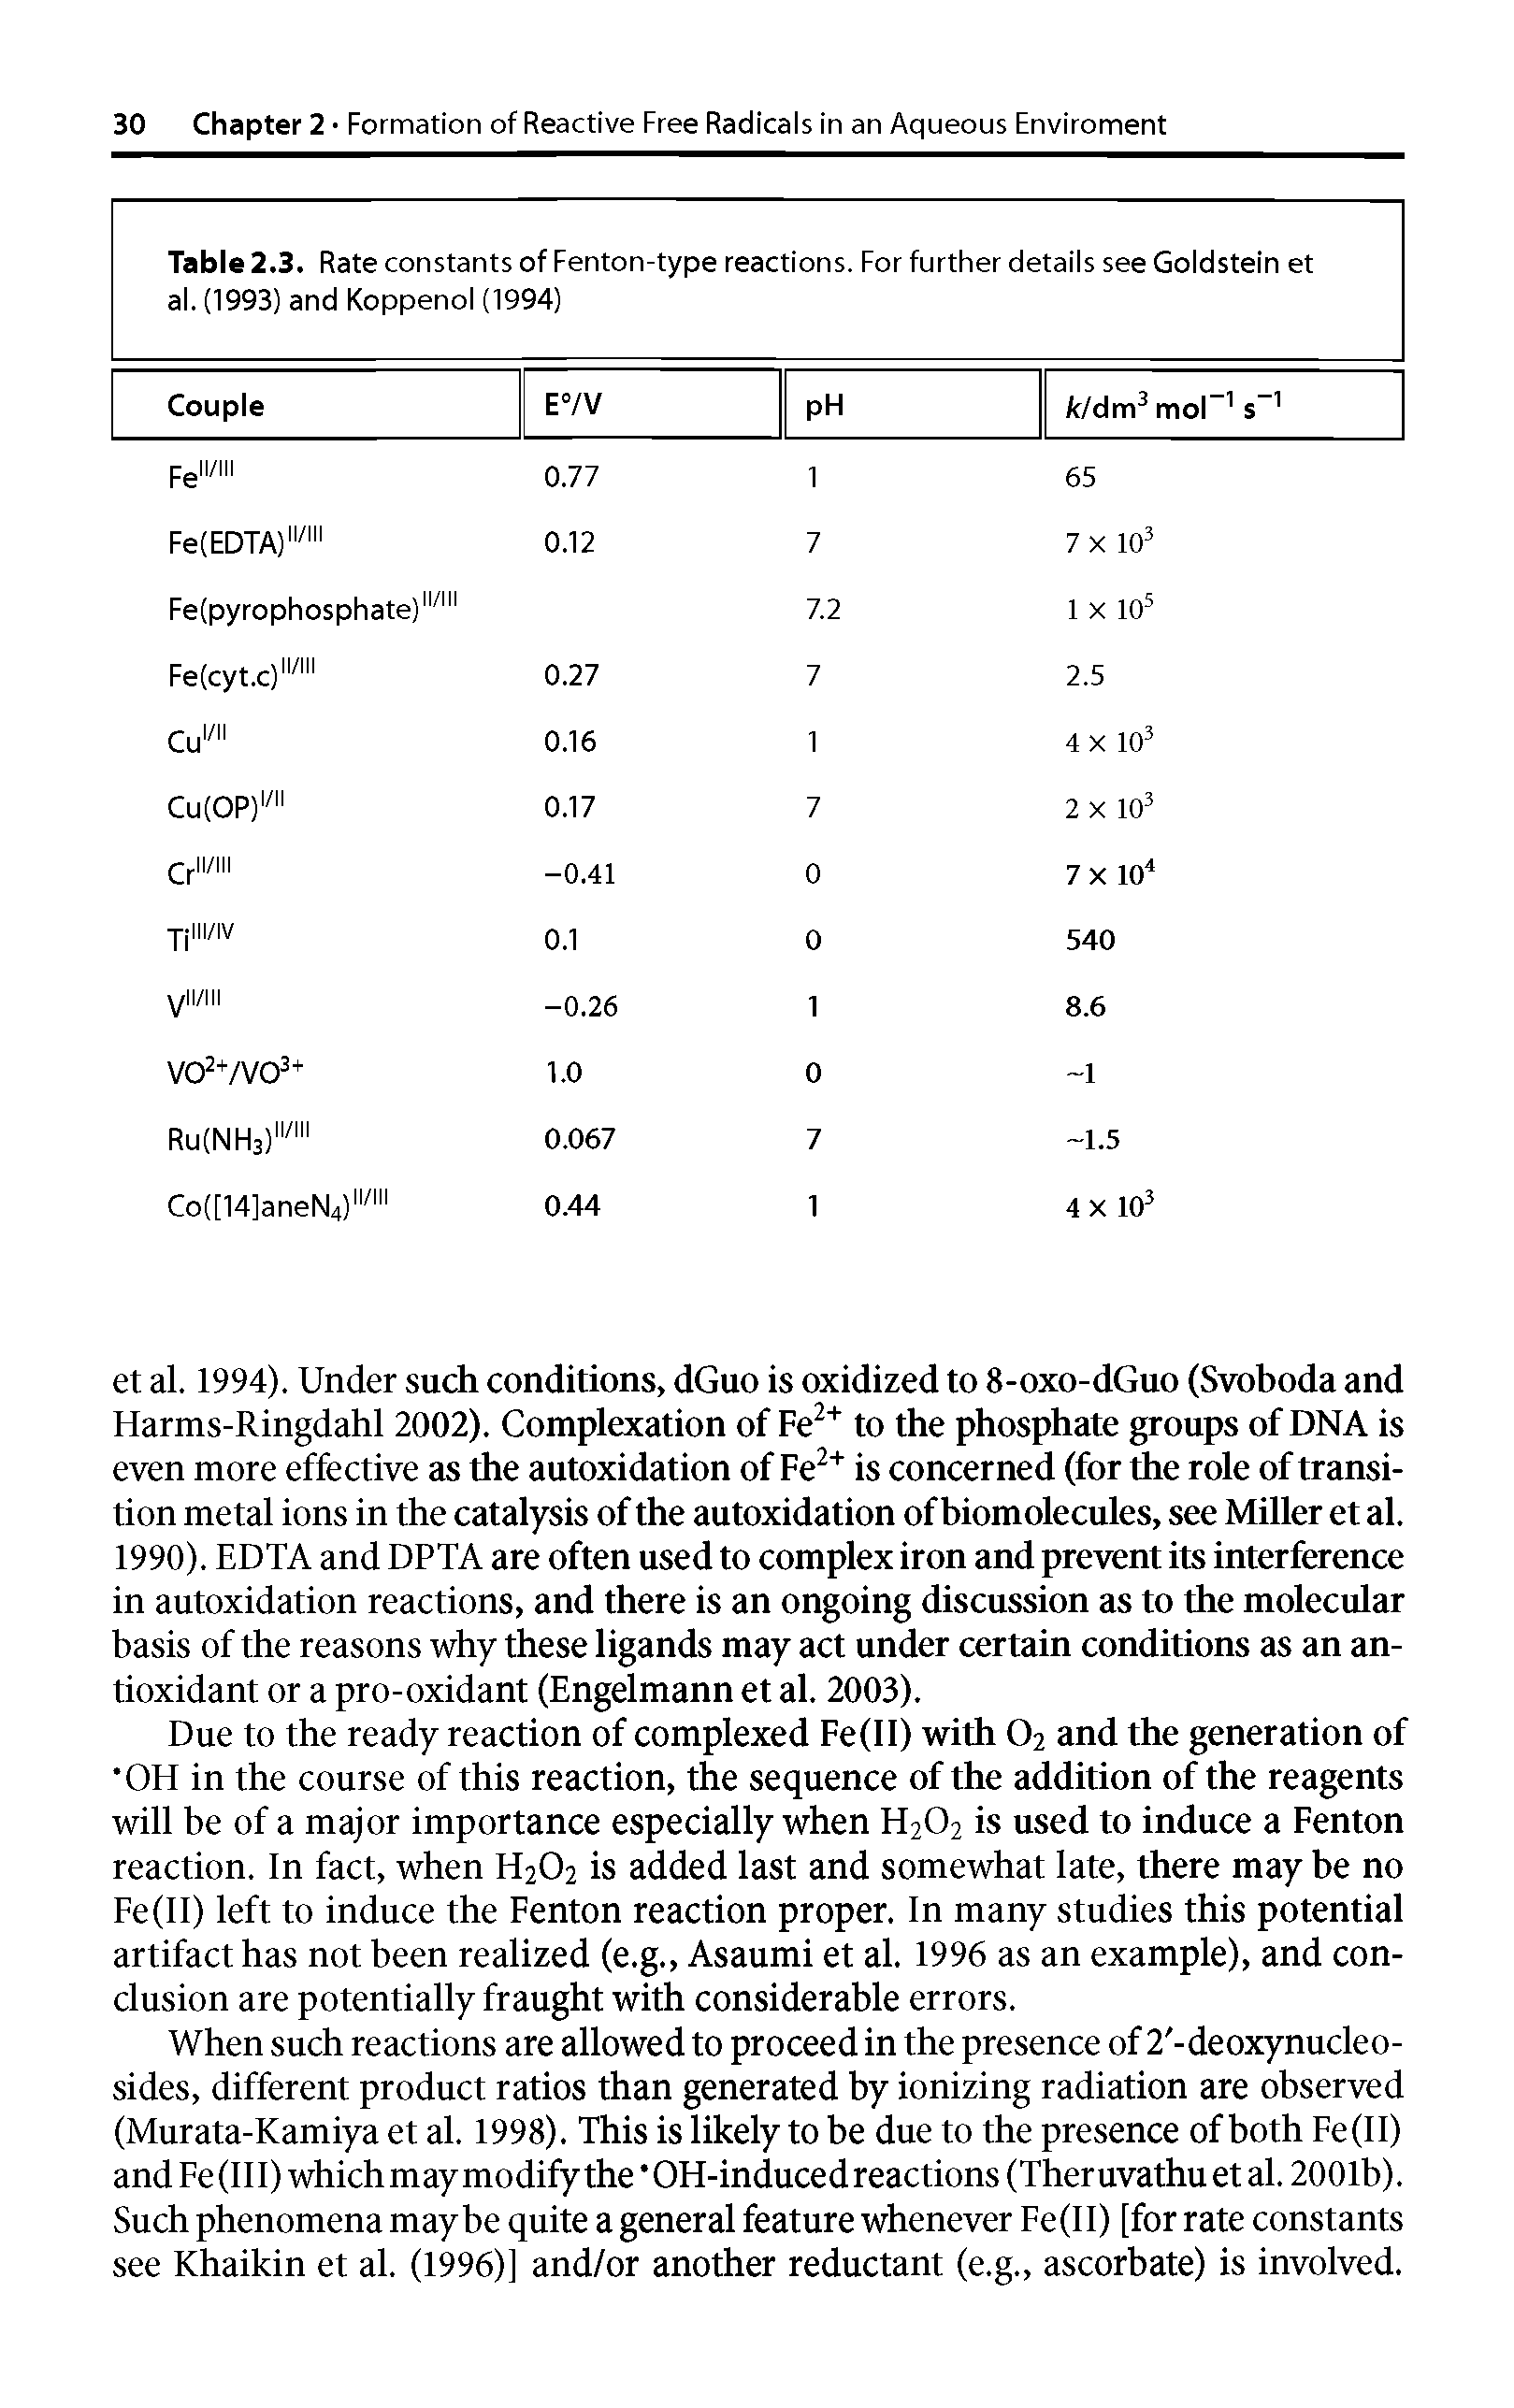 Table 2.3. Rate constants of Fenton-type reactions. For further details see Goldstein et al. (1993) and Koppenol (1994) ...